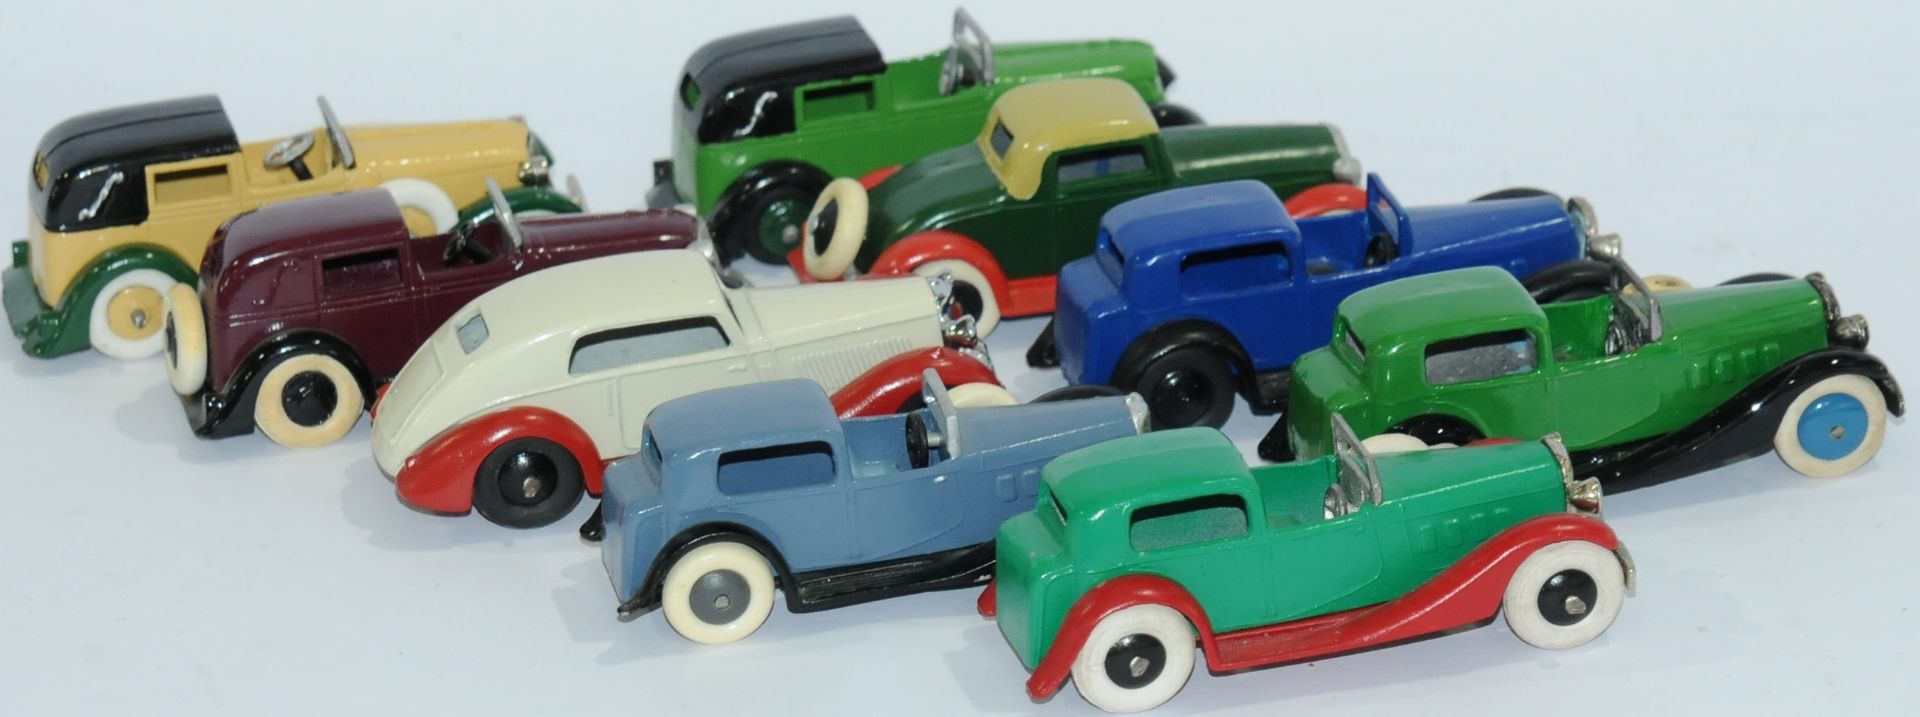 DG models or Simliar an unboxed group of classic cars - Image 2 of 2